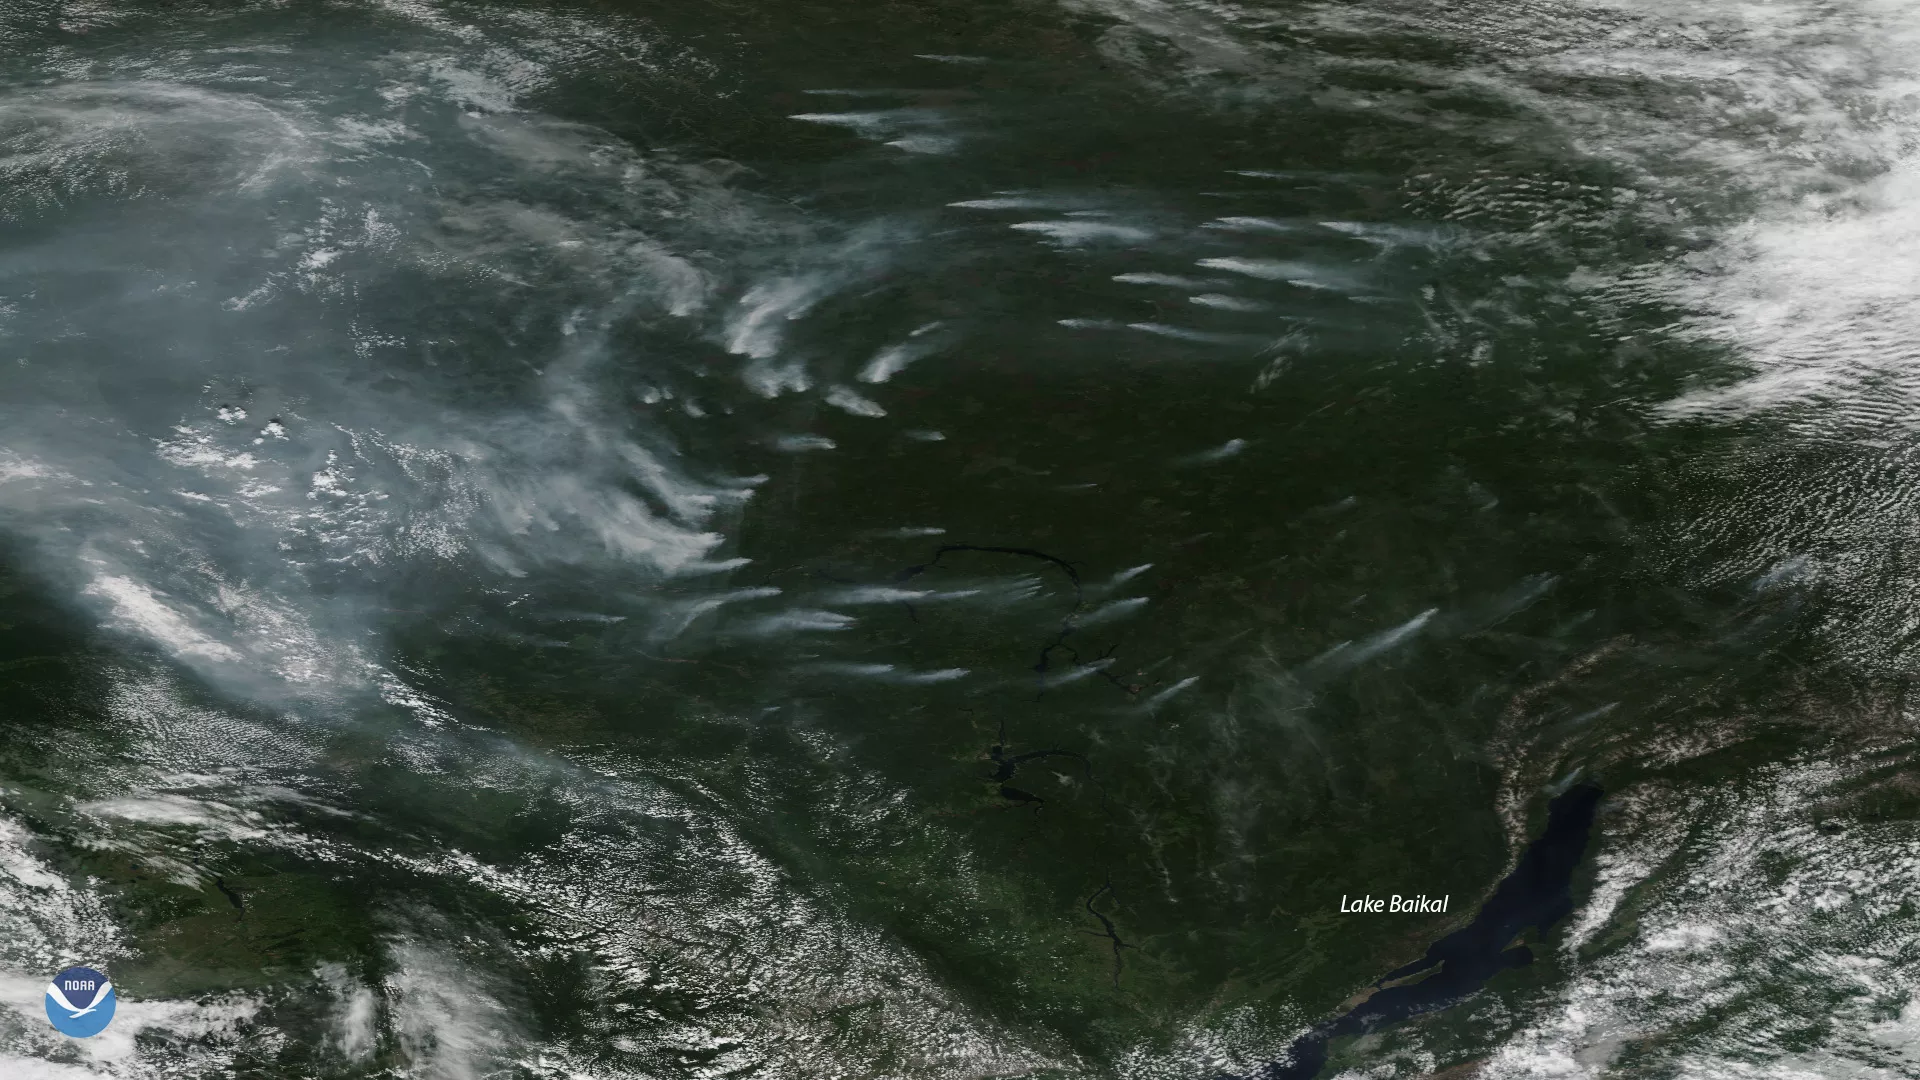 Plumes of smoke from active wildfires burning near Lake Baikal in Russia, seen via NOAA-20's True Color imagery from July 4, 2019.